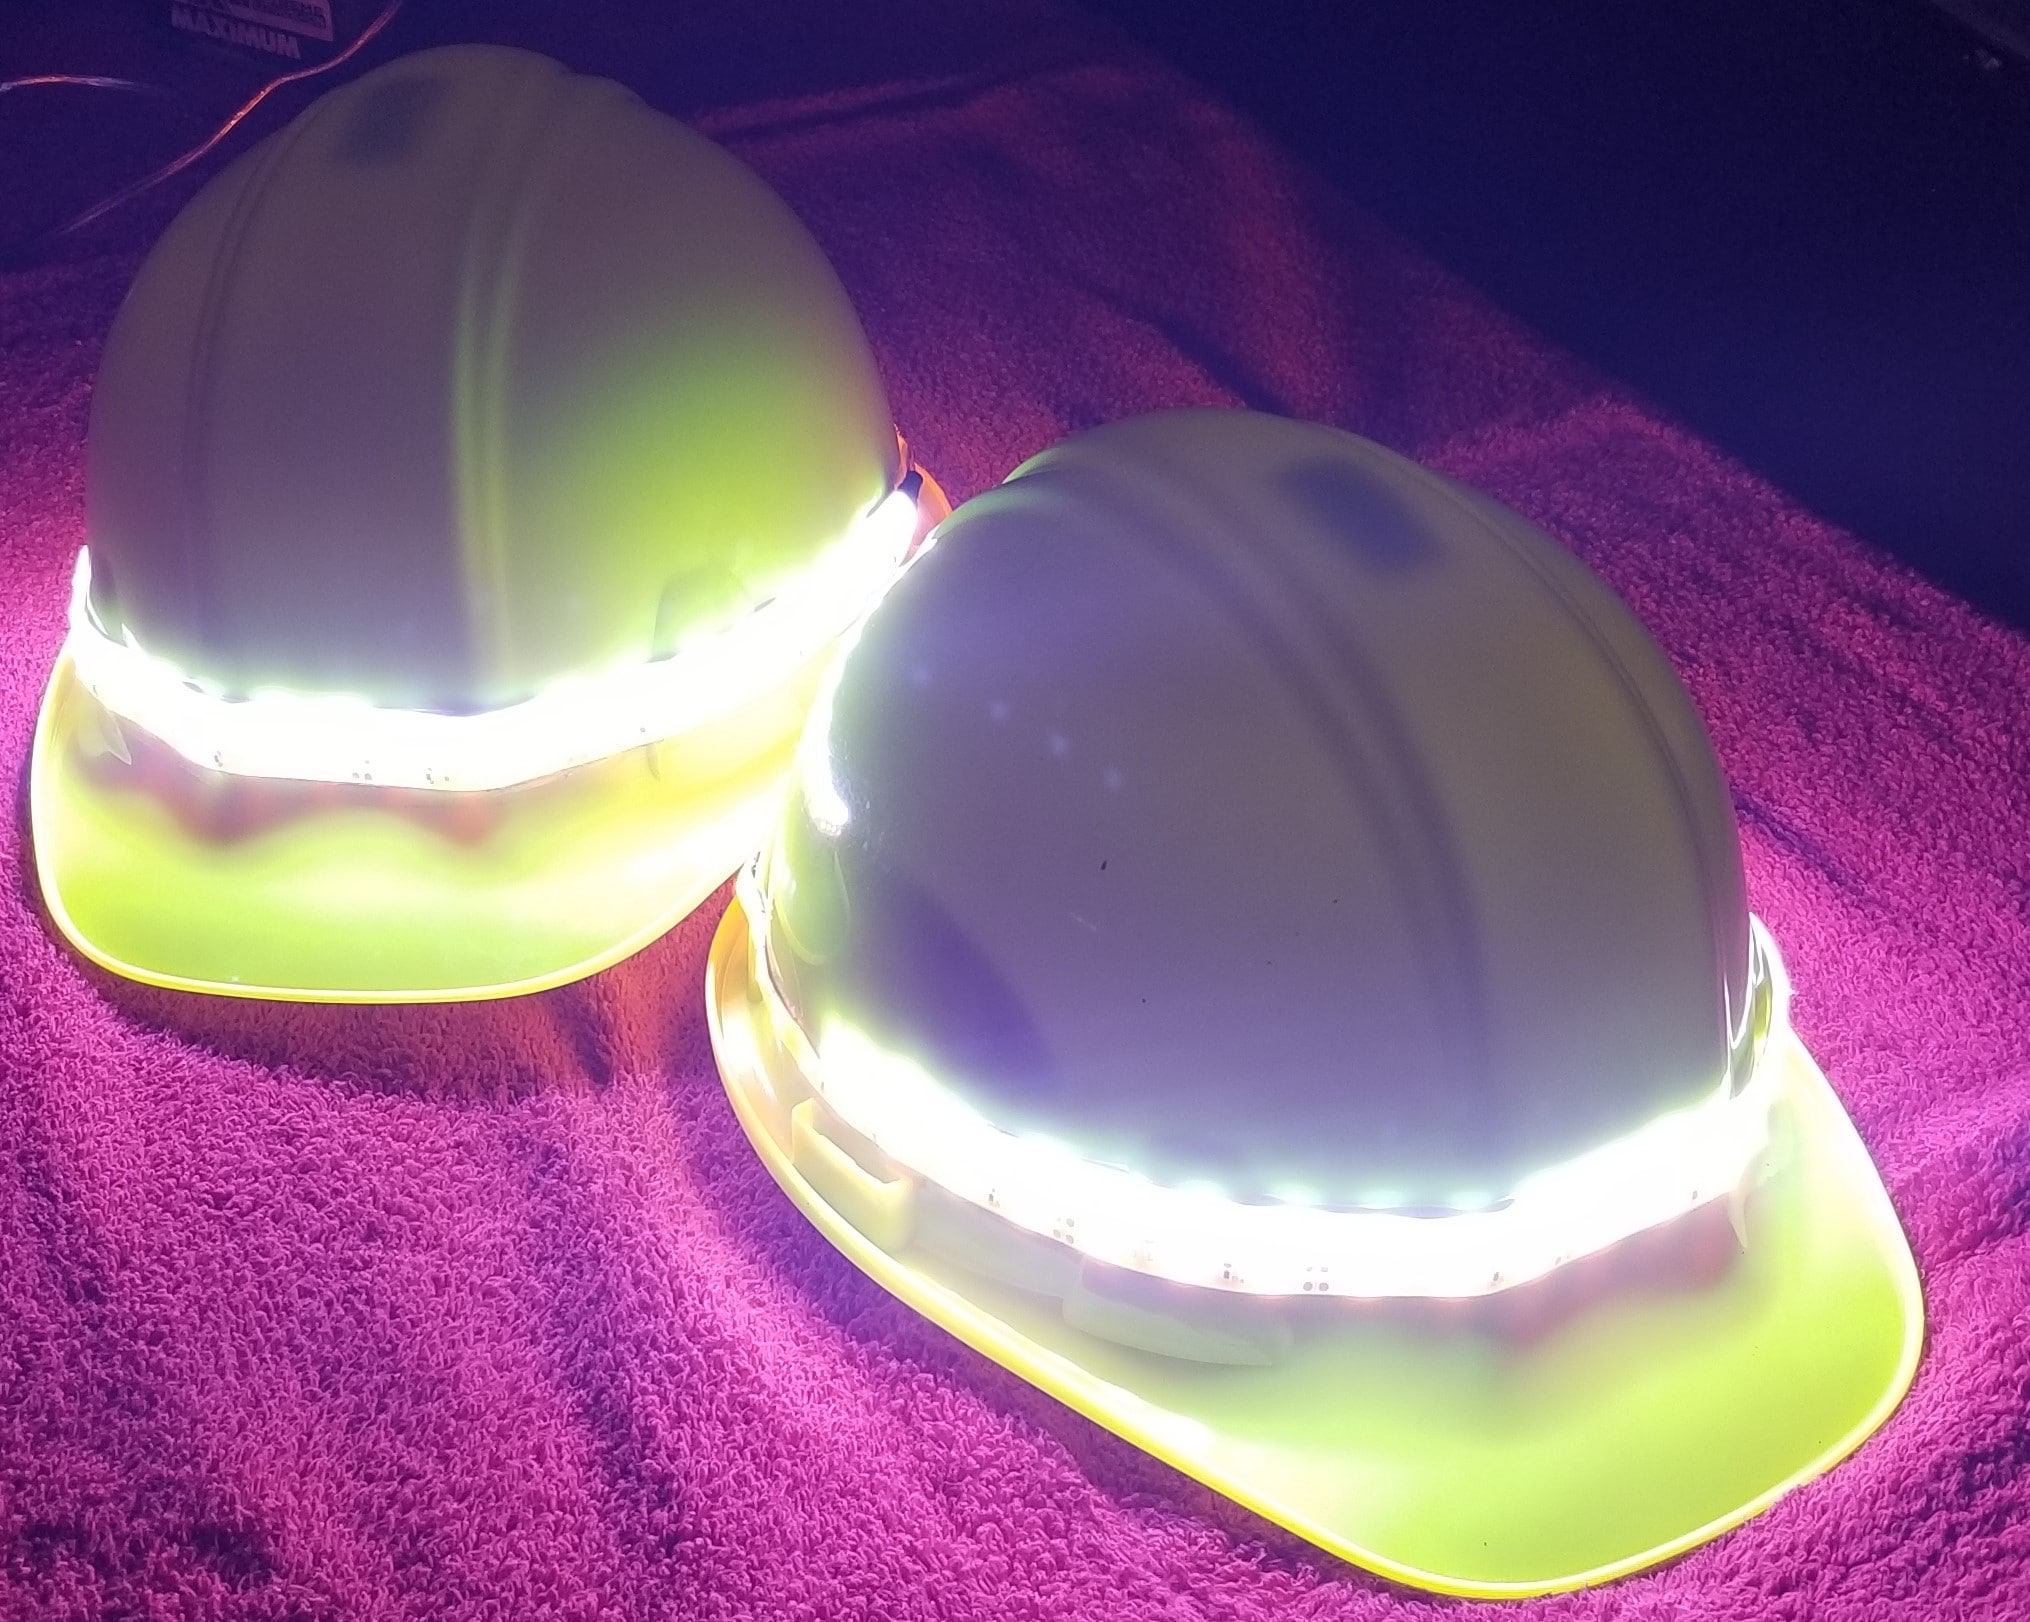 LED Hard Hat Lights, Flagger hard hats, Hard Hat Lights, Hard Hat LED Lighting System, TCP hard hats, SEEME-NOW LED Hard Hat Lights, PPE lights Visible 360° from 500 meters, TCP, traffic control person, road workers, tow truck drivers 